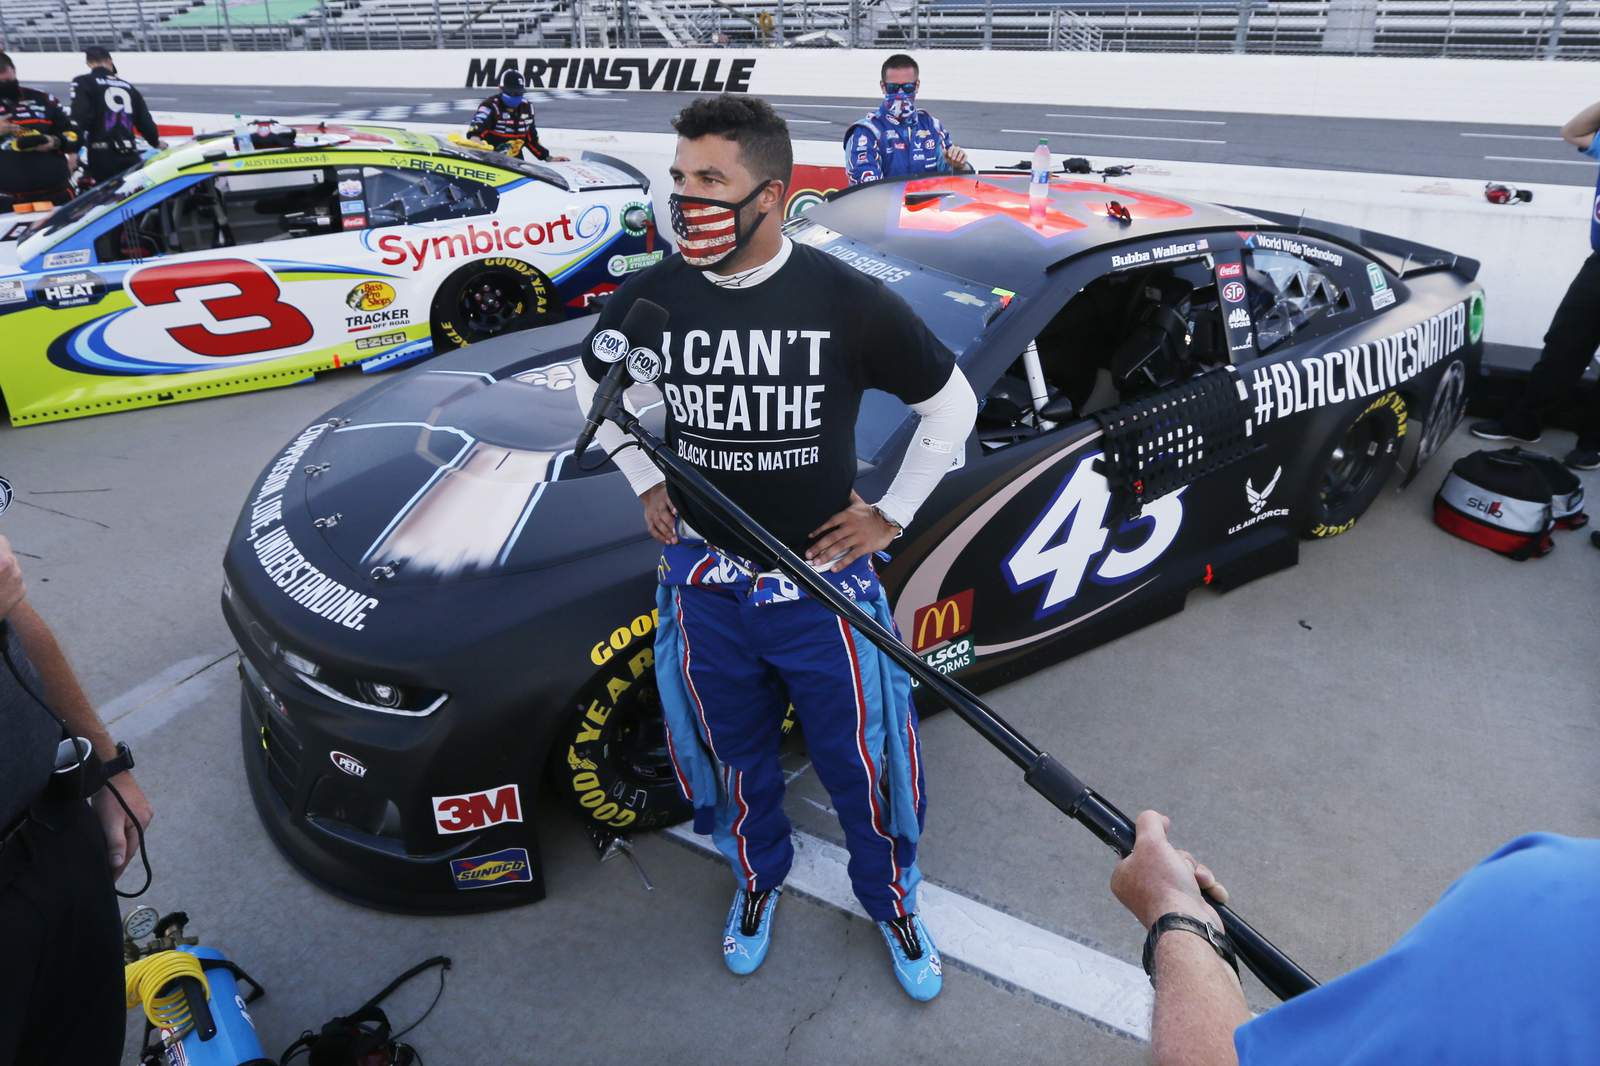 Heat is on: Hectic NASCAR tests drained drivers at Homestead